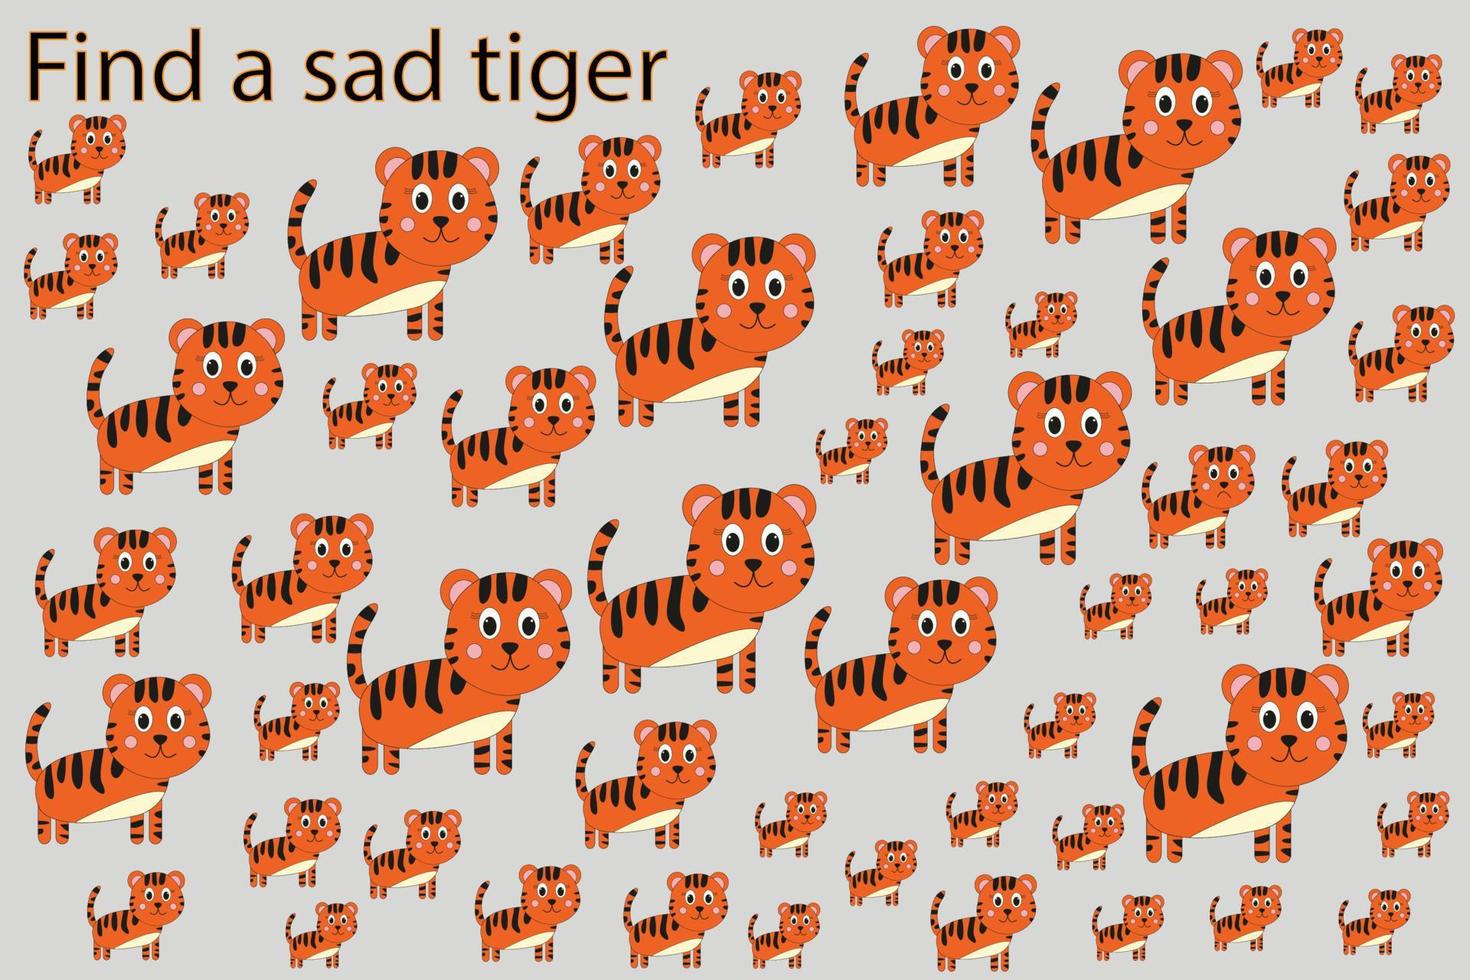 Find a sad tiger among the others. Children's educational game. vector